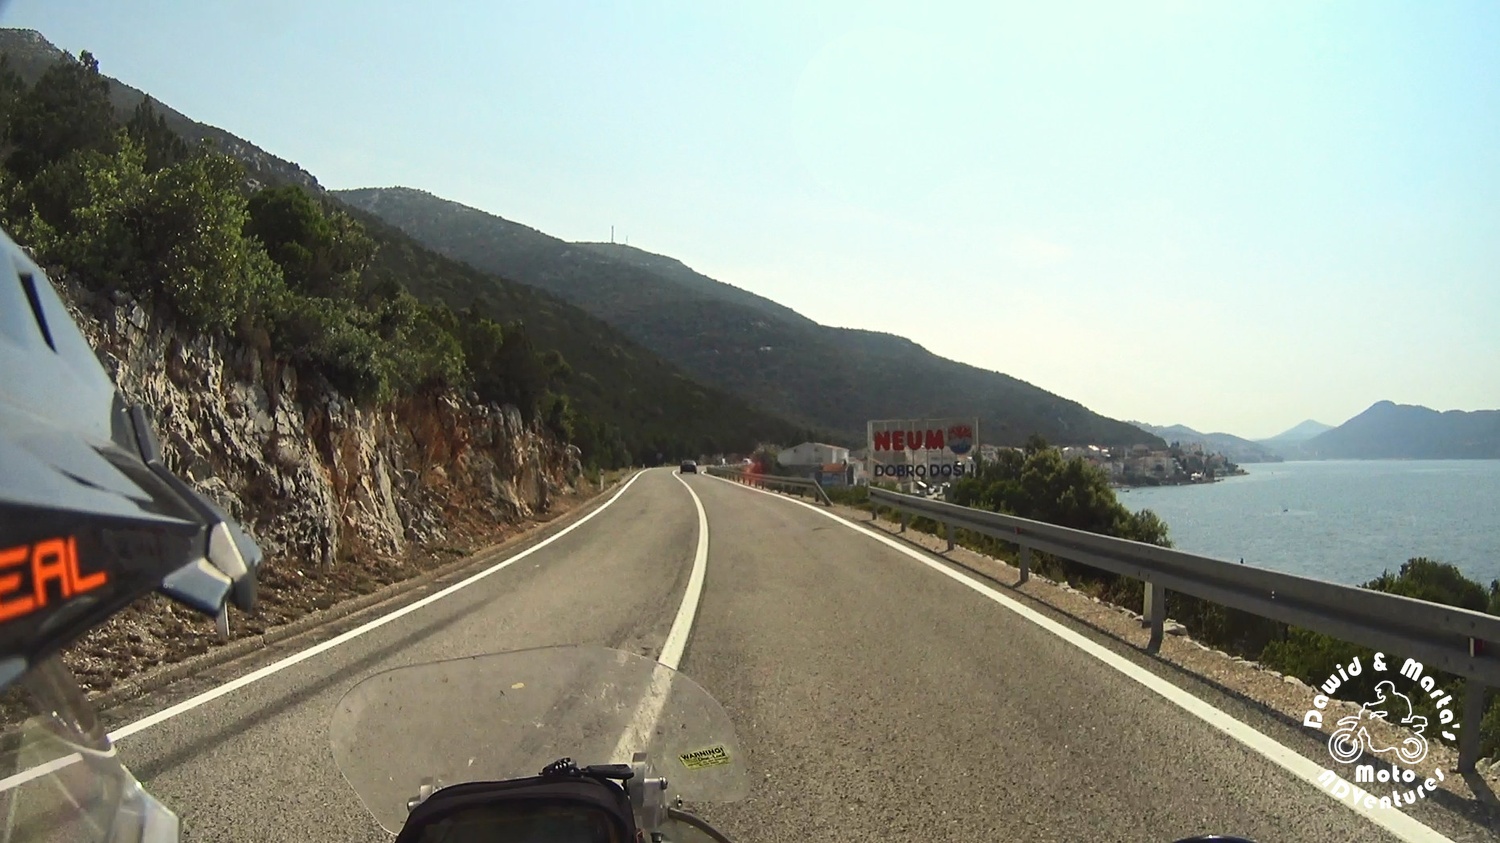 Neum welcome sign